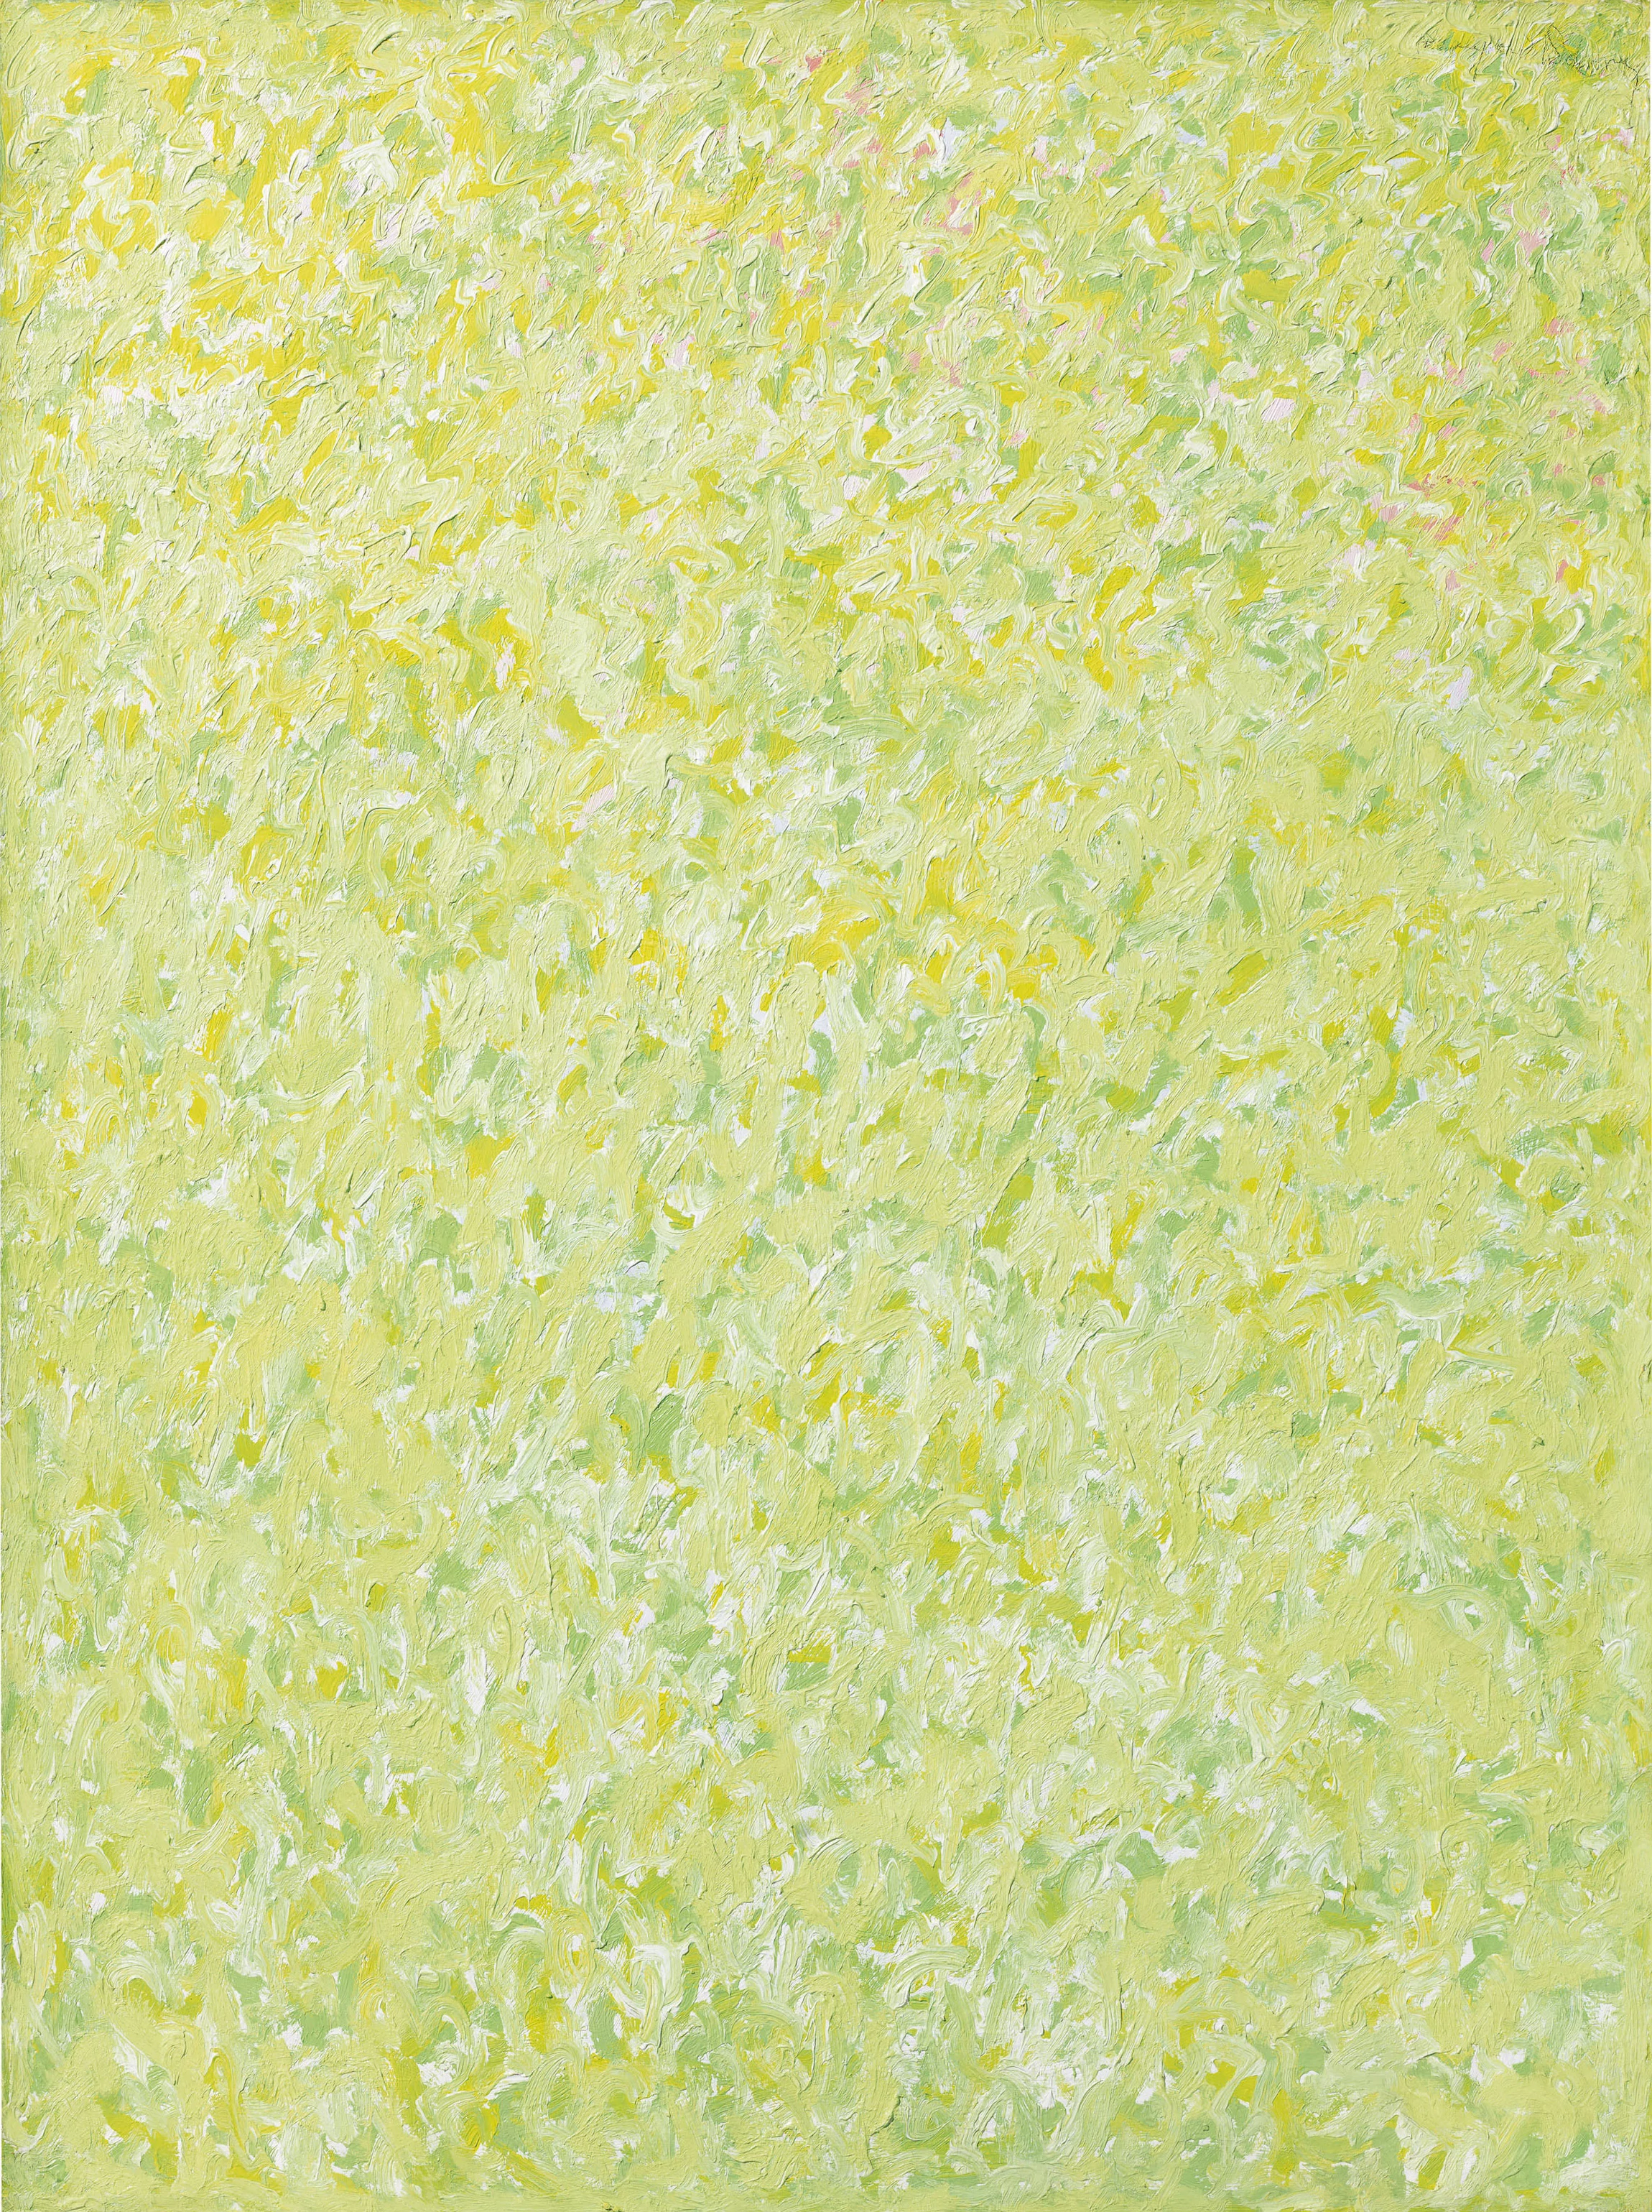 Abstraction No. 4, Beauford Delaney